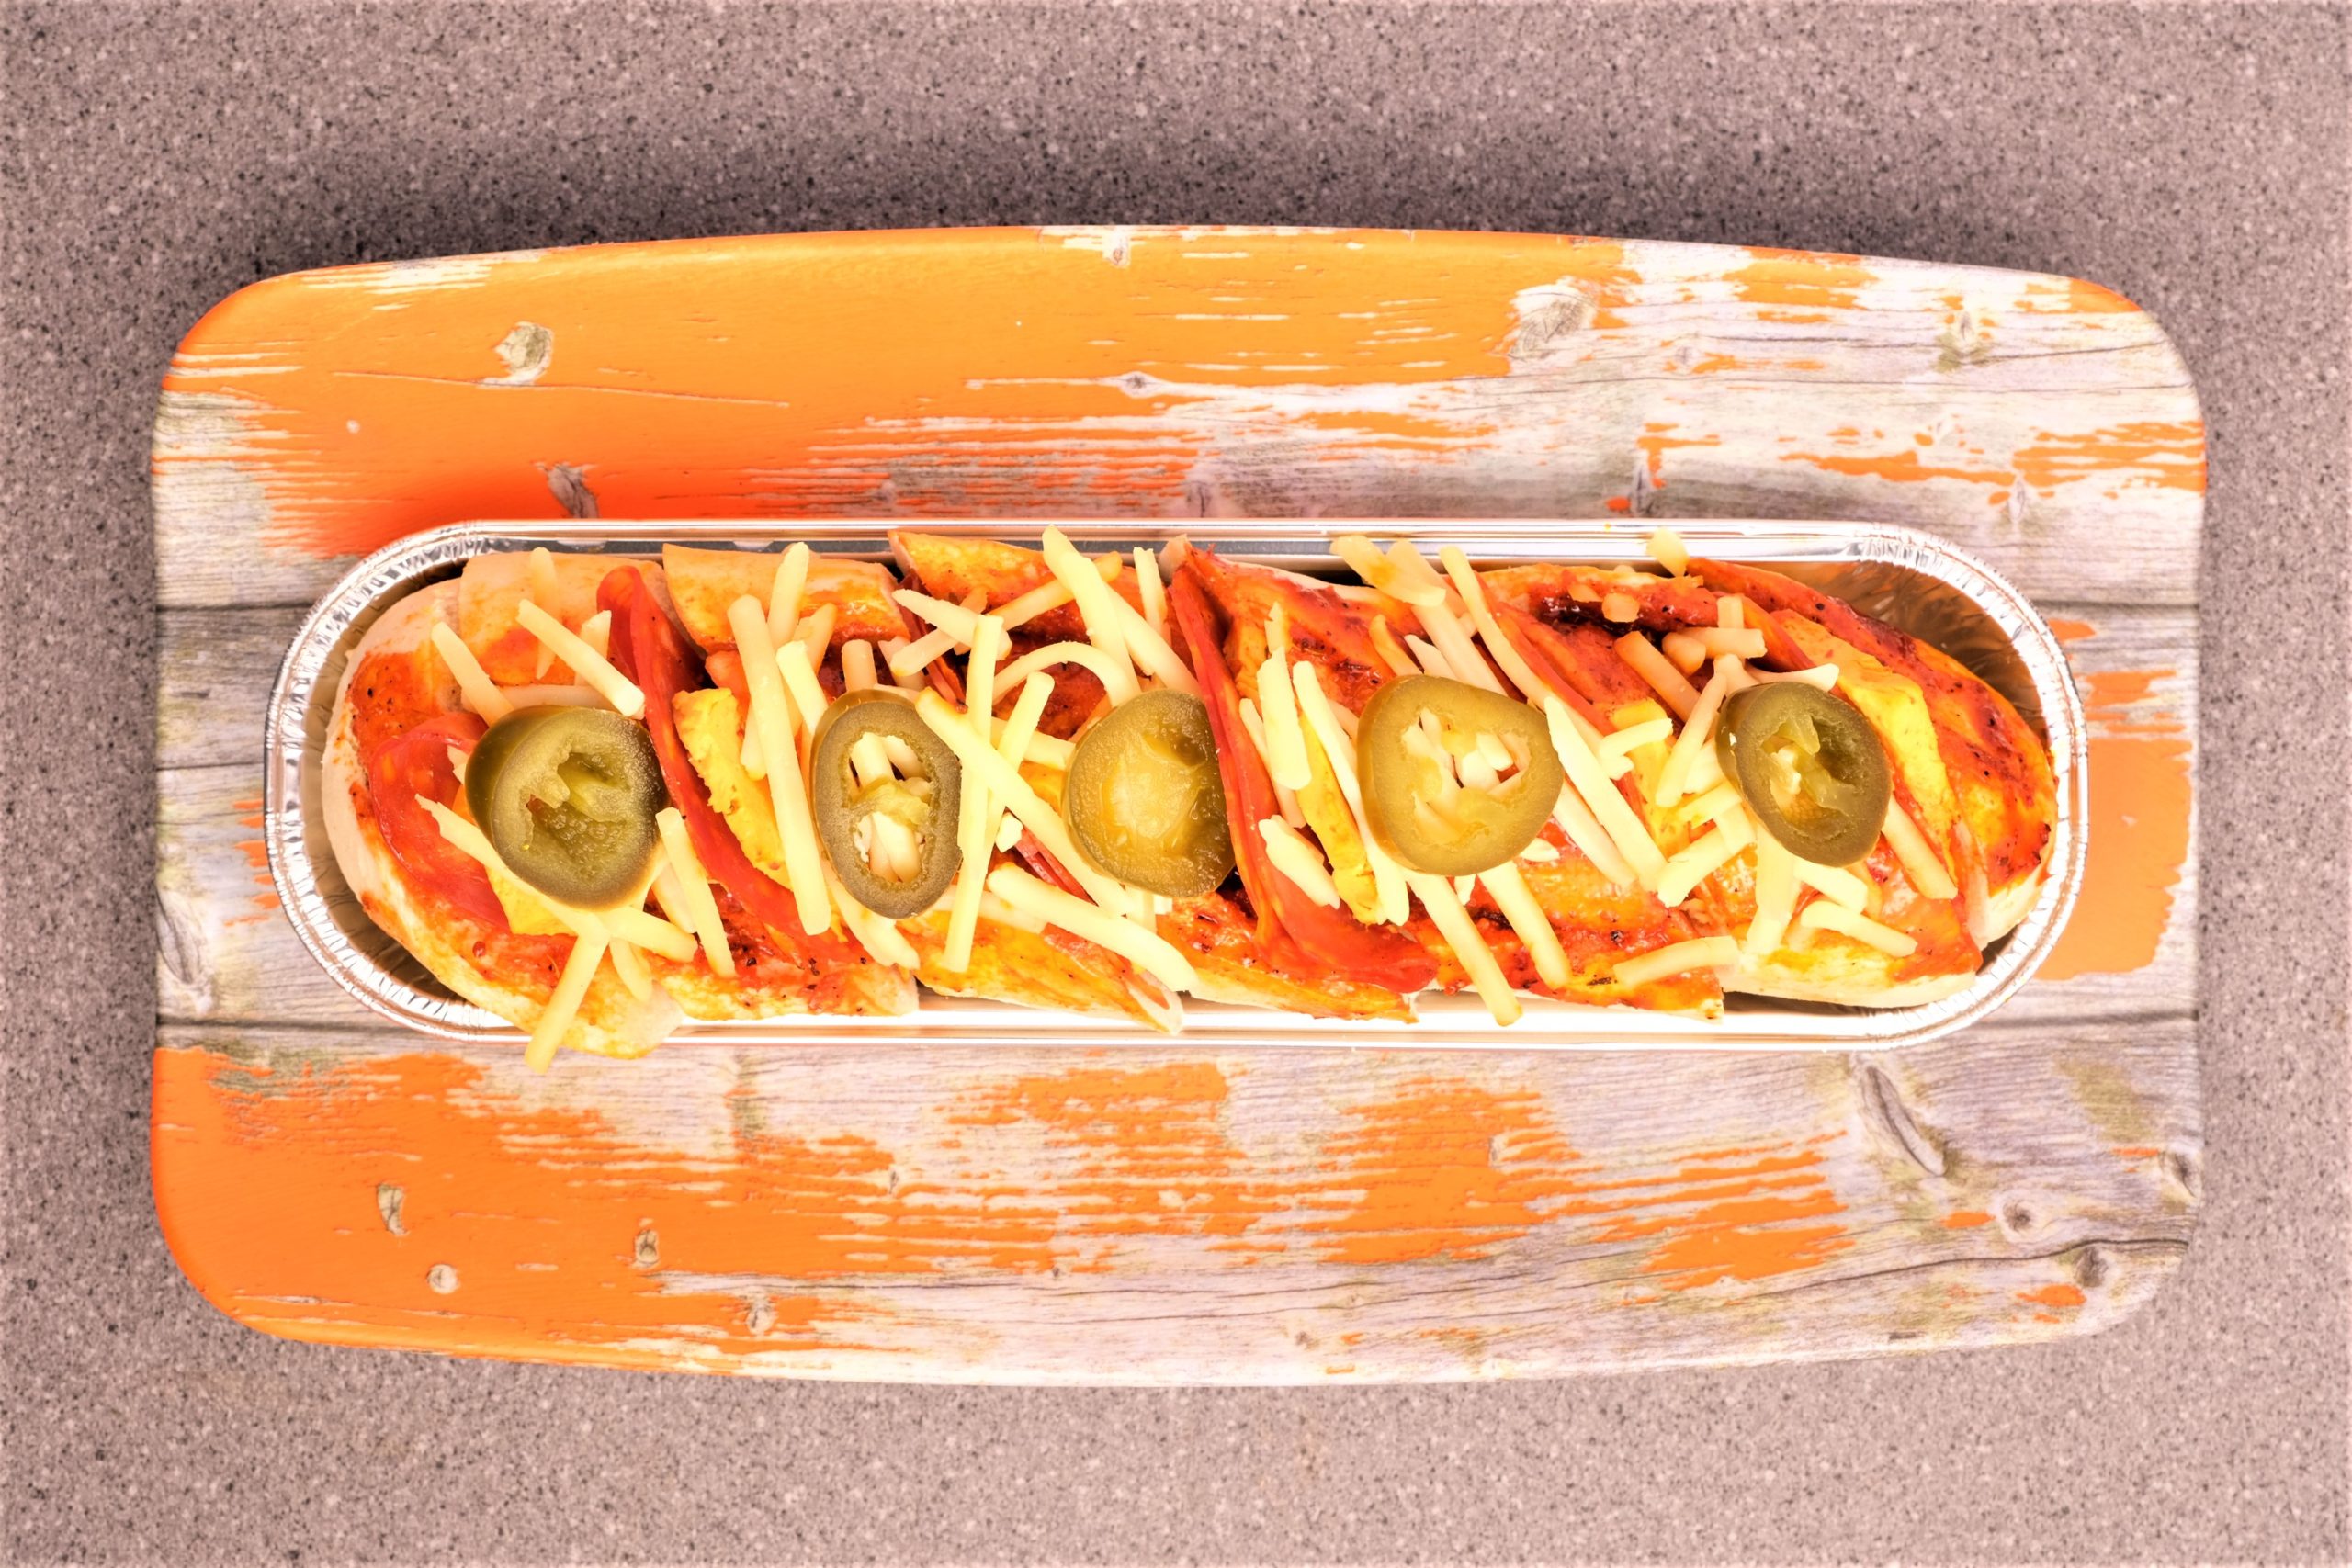 Spicy Nacho Cheese Baguette